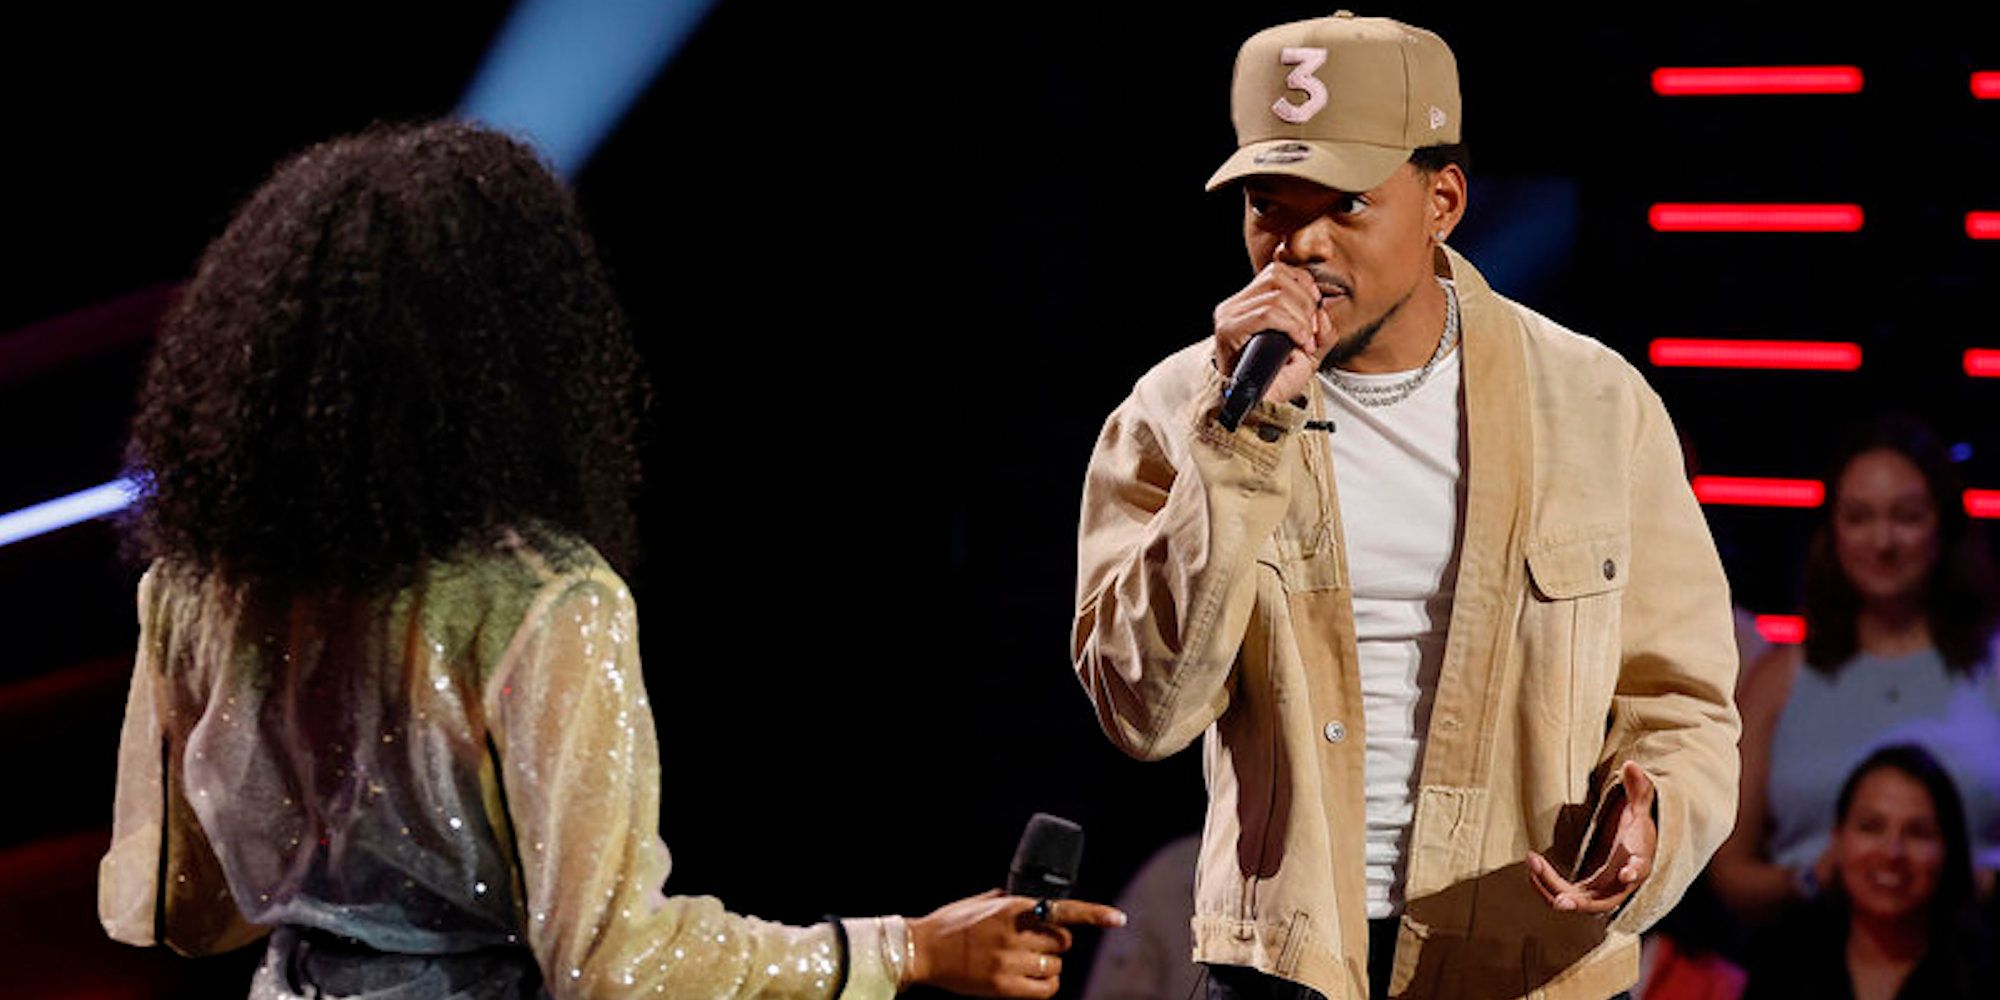 Chance the Rapper tries to sway vocalist Nadège's by singing a duet with her on stage at 'The Voice'